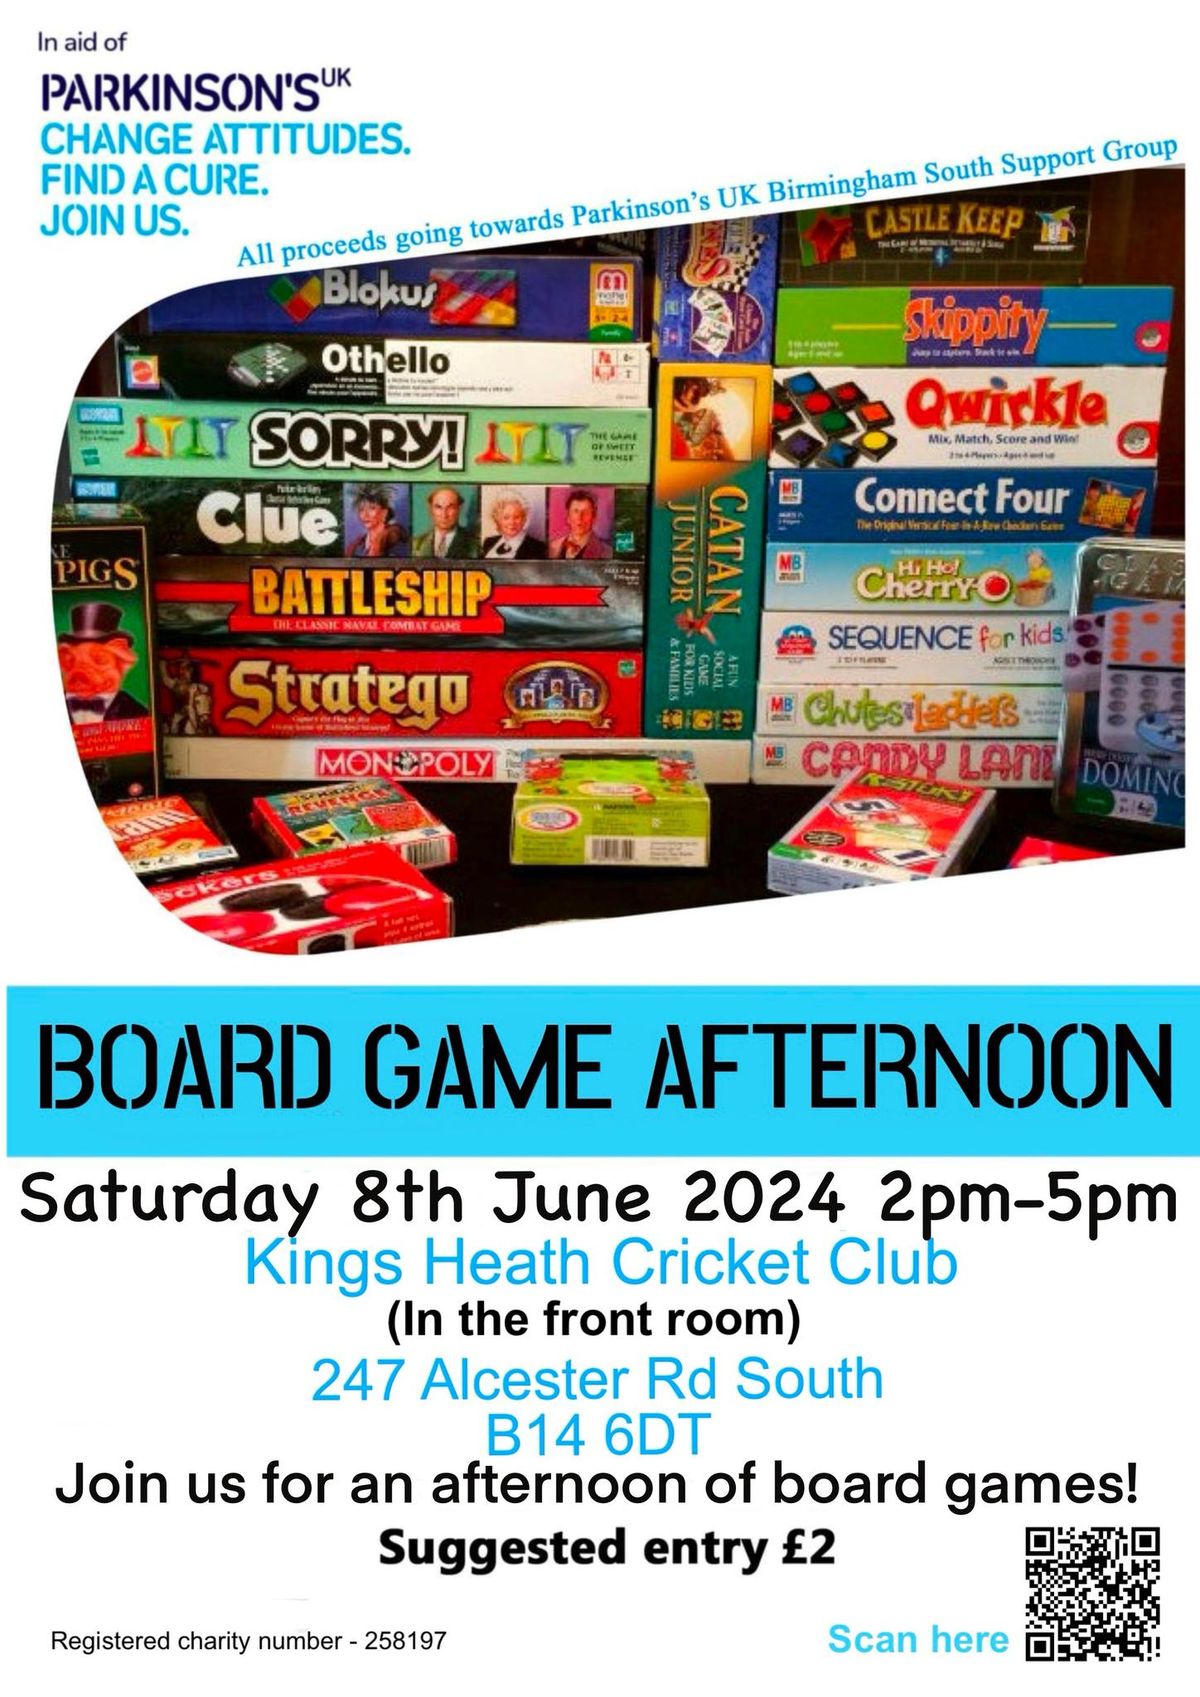 Board Game Afternoon for Parkinson's UK Birmingham South